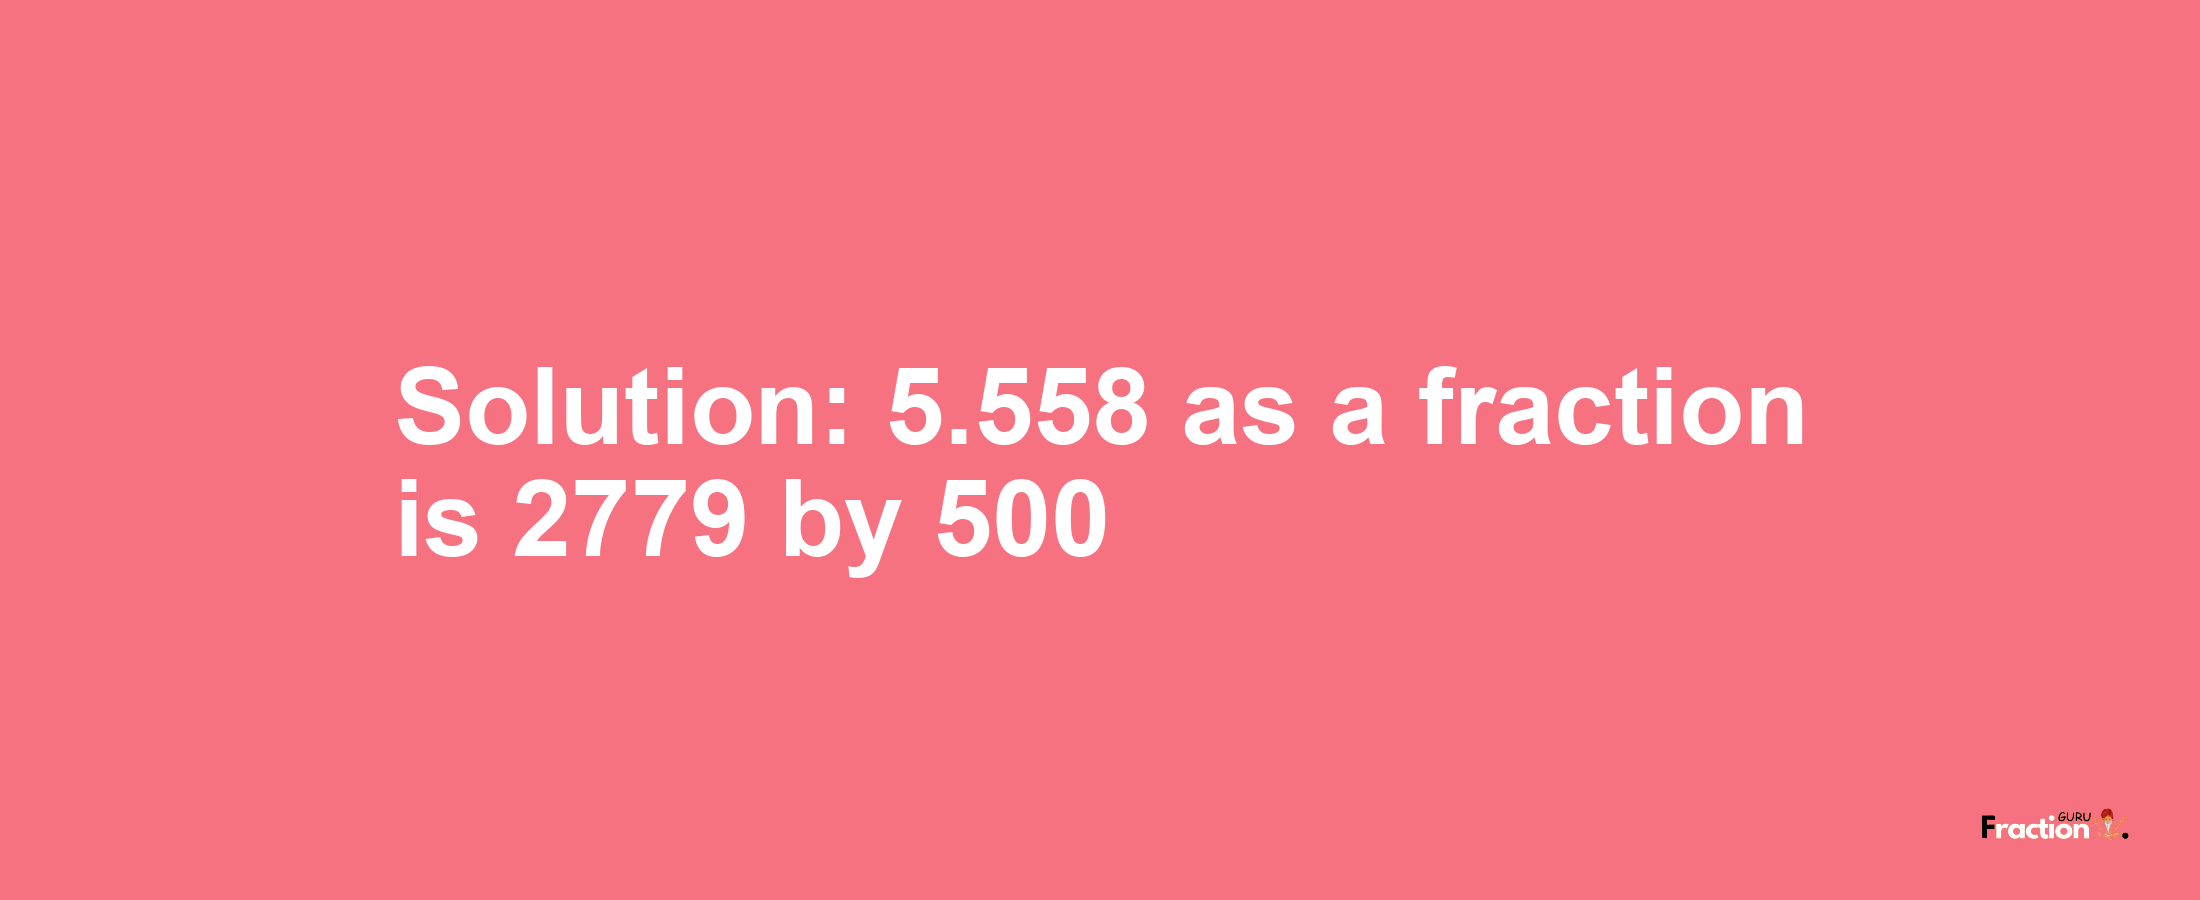 Solution:5.558 as a fraction is 2779/500